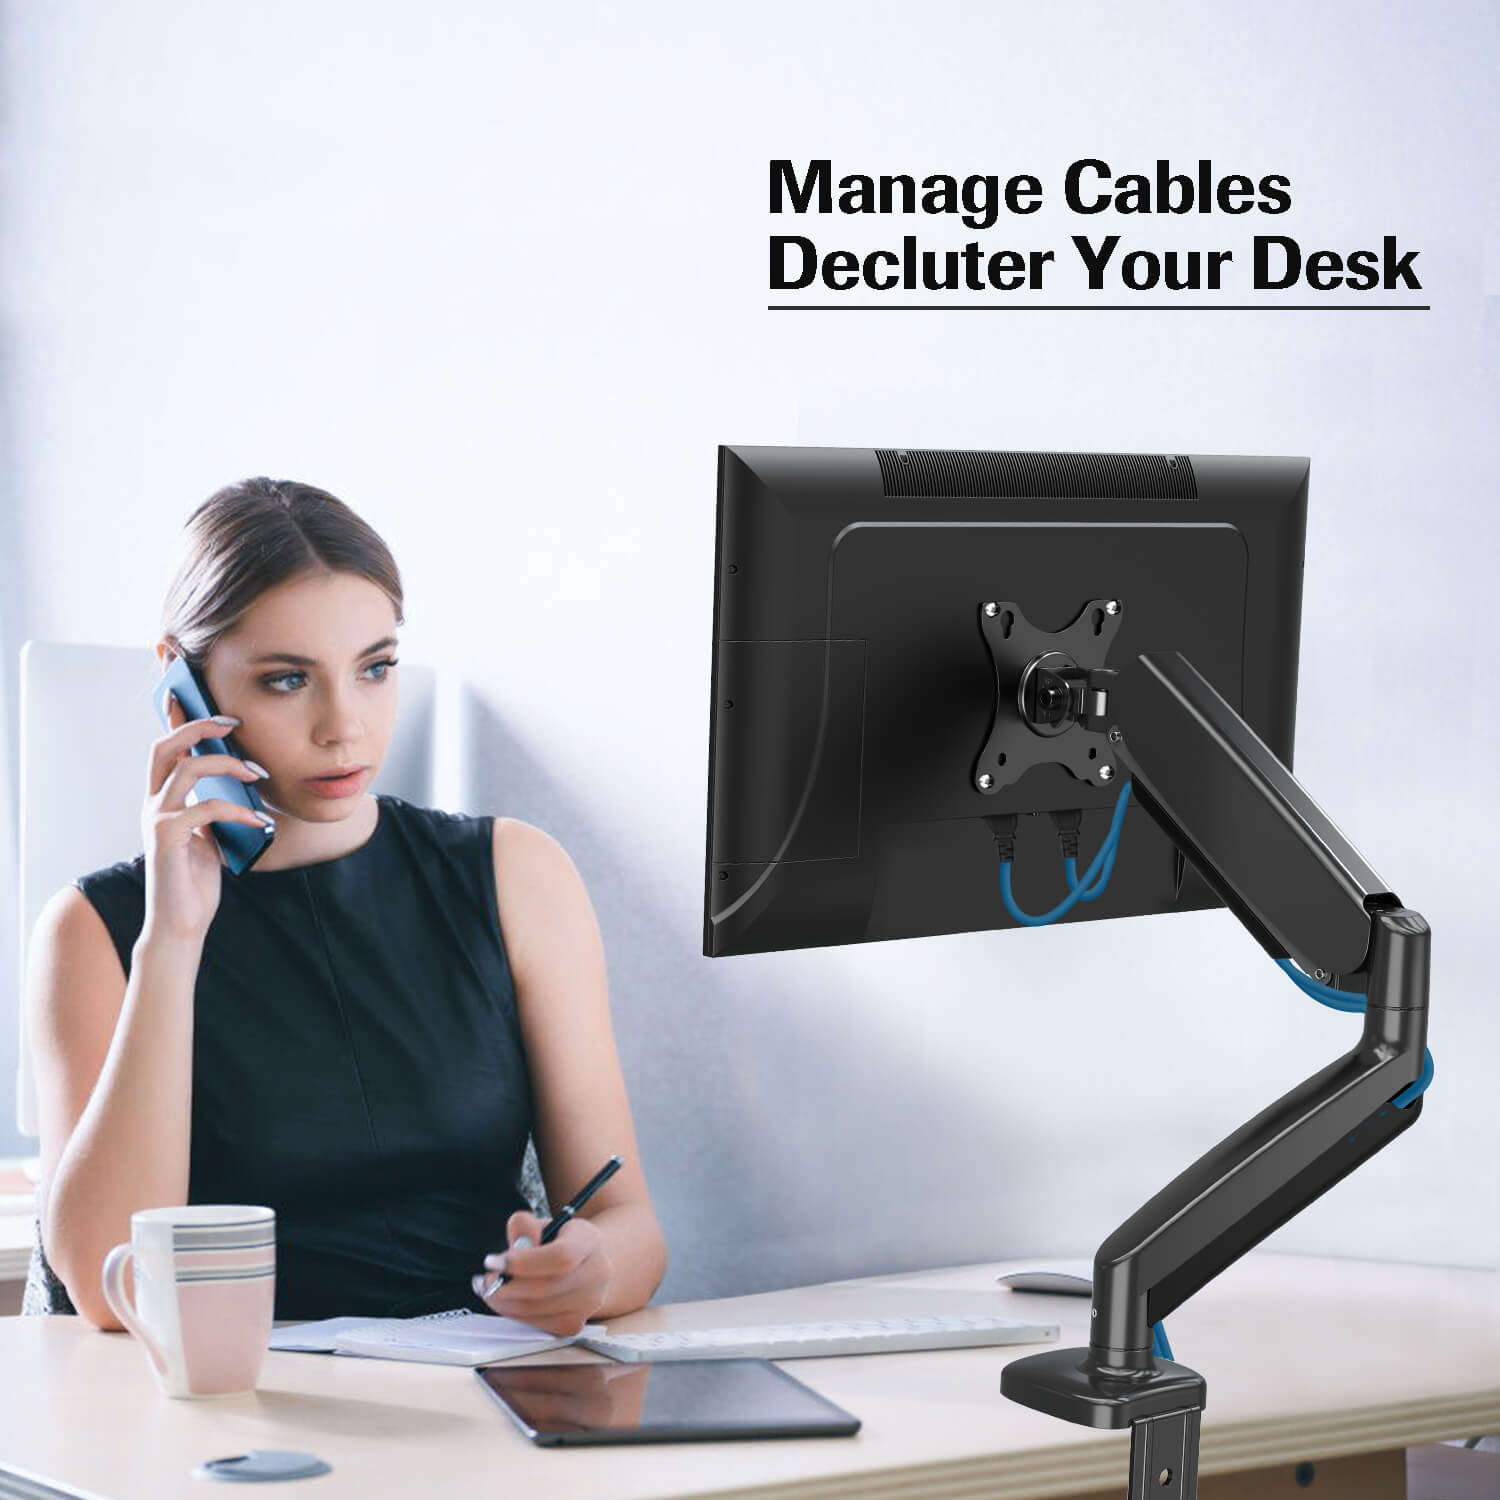 MOUNTUP Single Monitor Desk Mount, Fully Adjustable Single Monitor Arm  Stand, Computer Screen Mount for 1 Max 32 Inch,17.6 lbs Display, Monitor  Stand